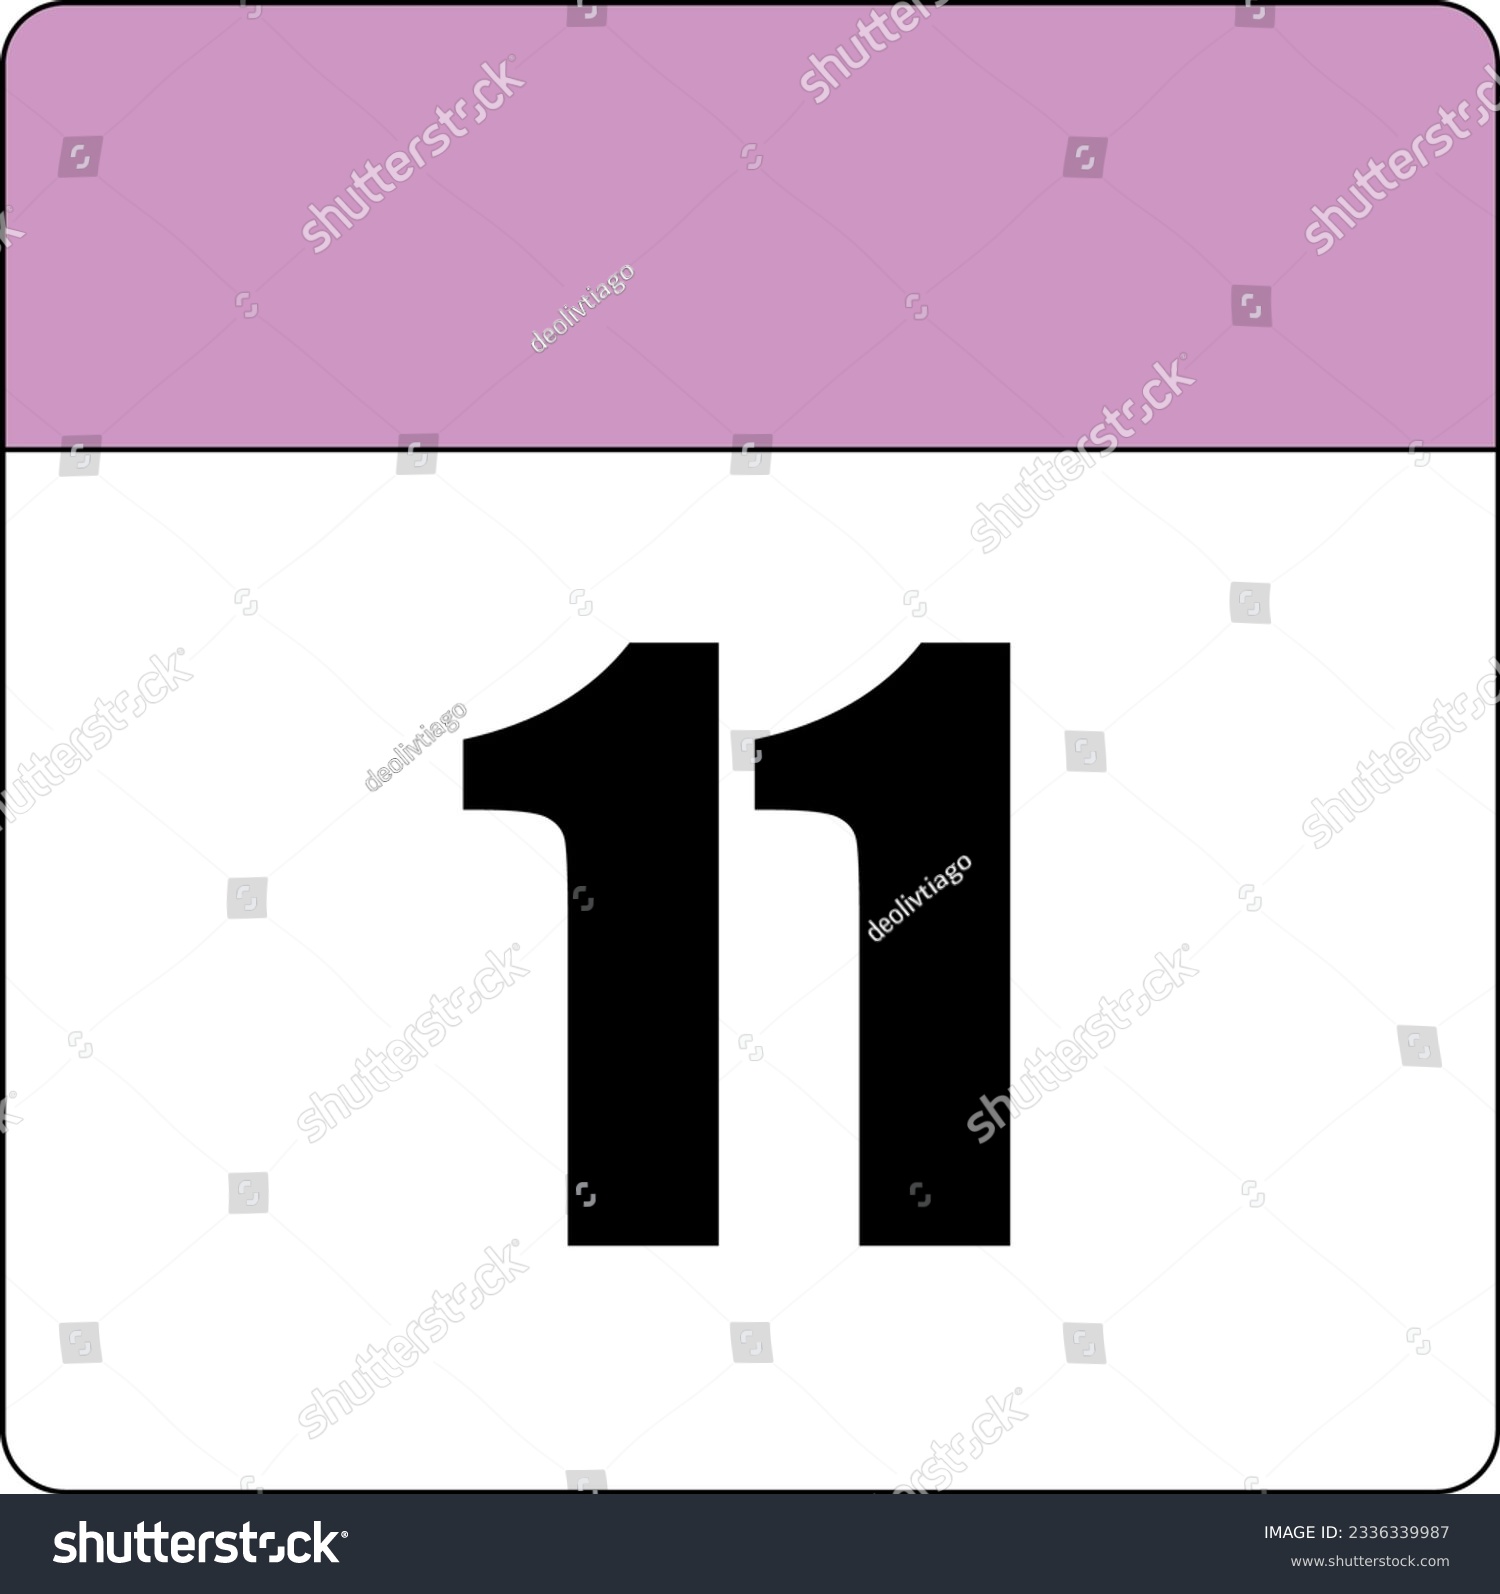 SVG of simple calendar icon with pink header and white background showing 11th day number eleven svg